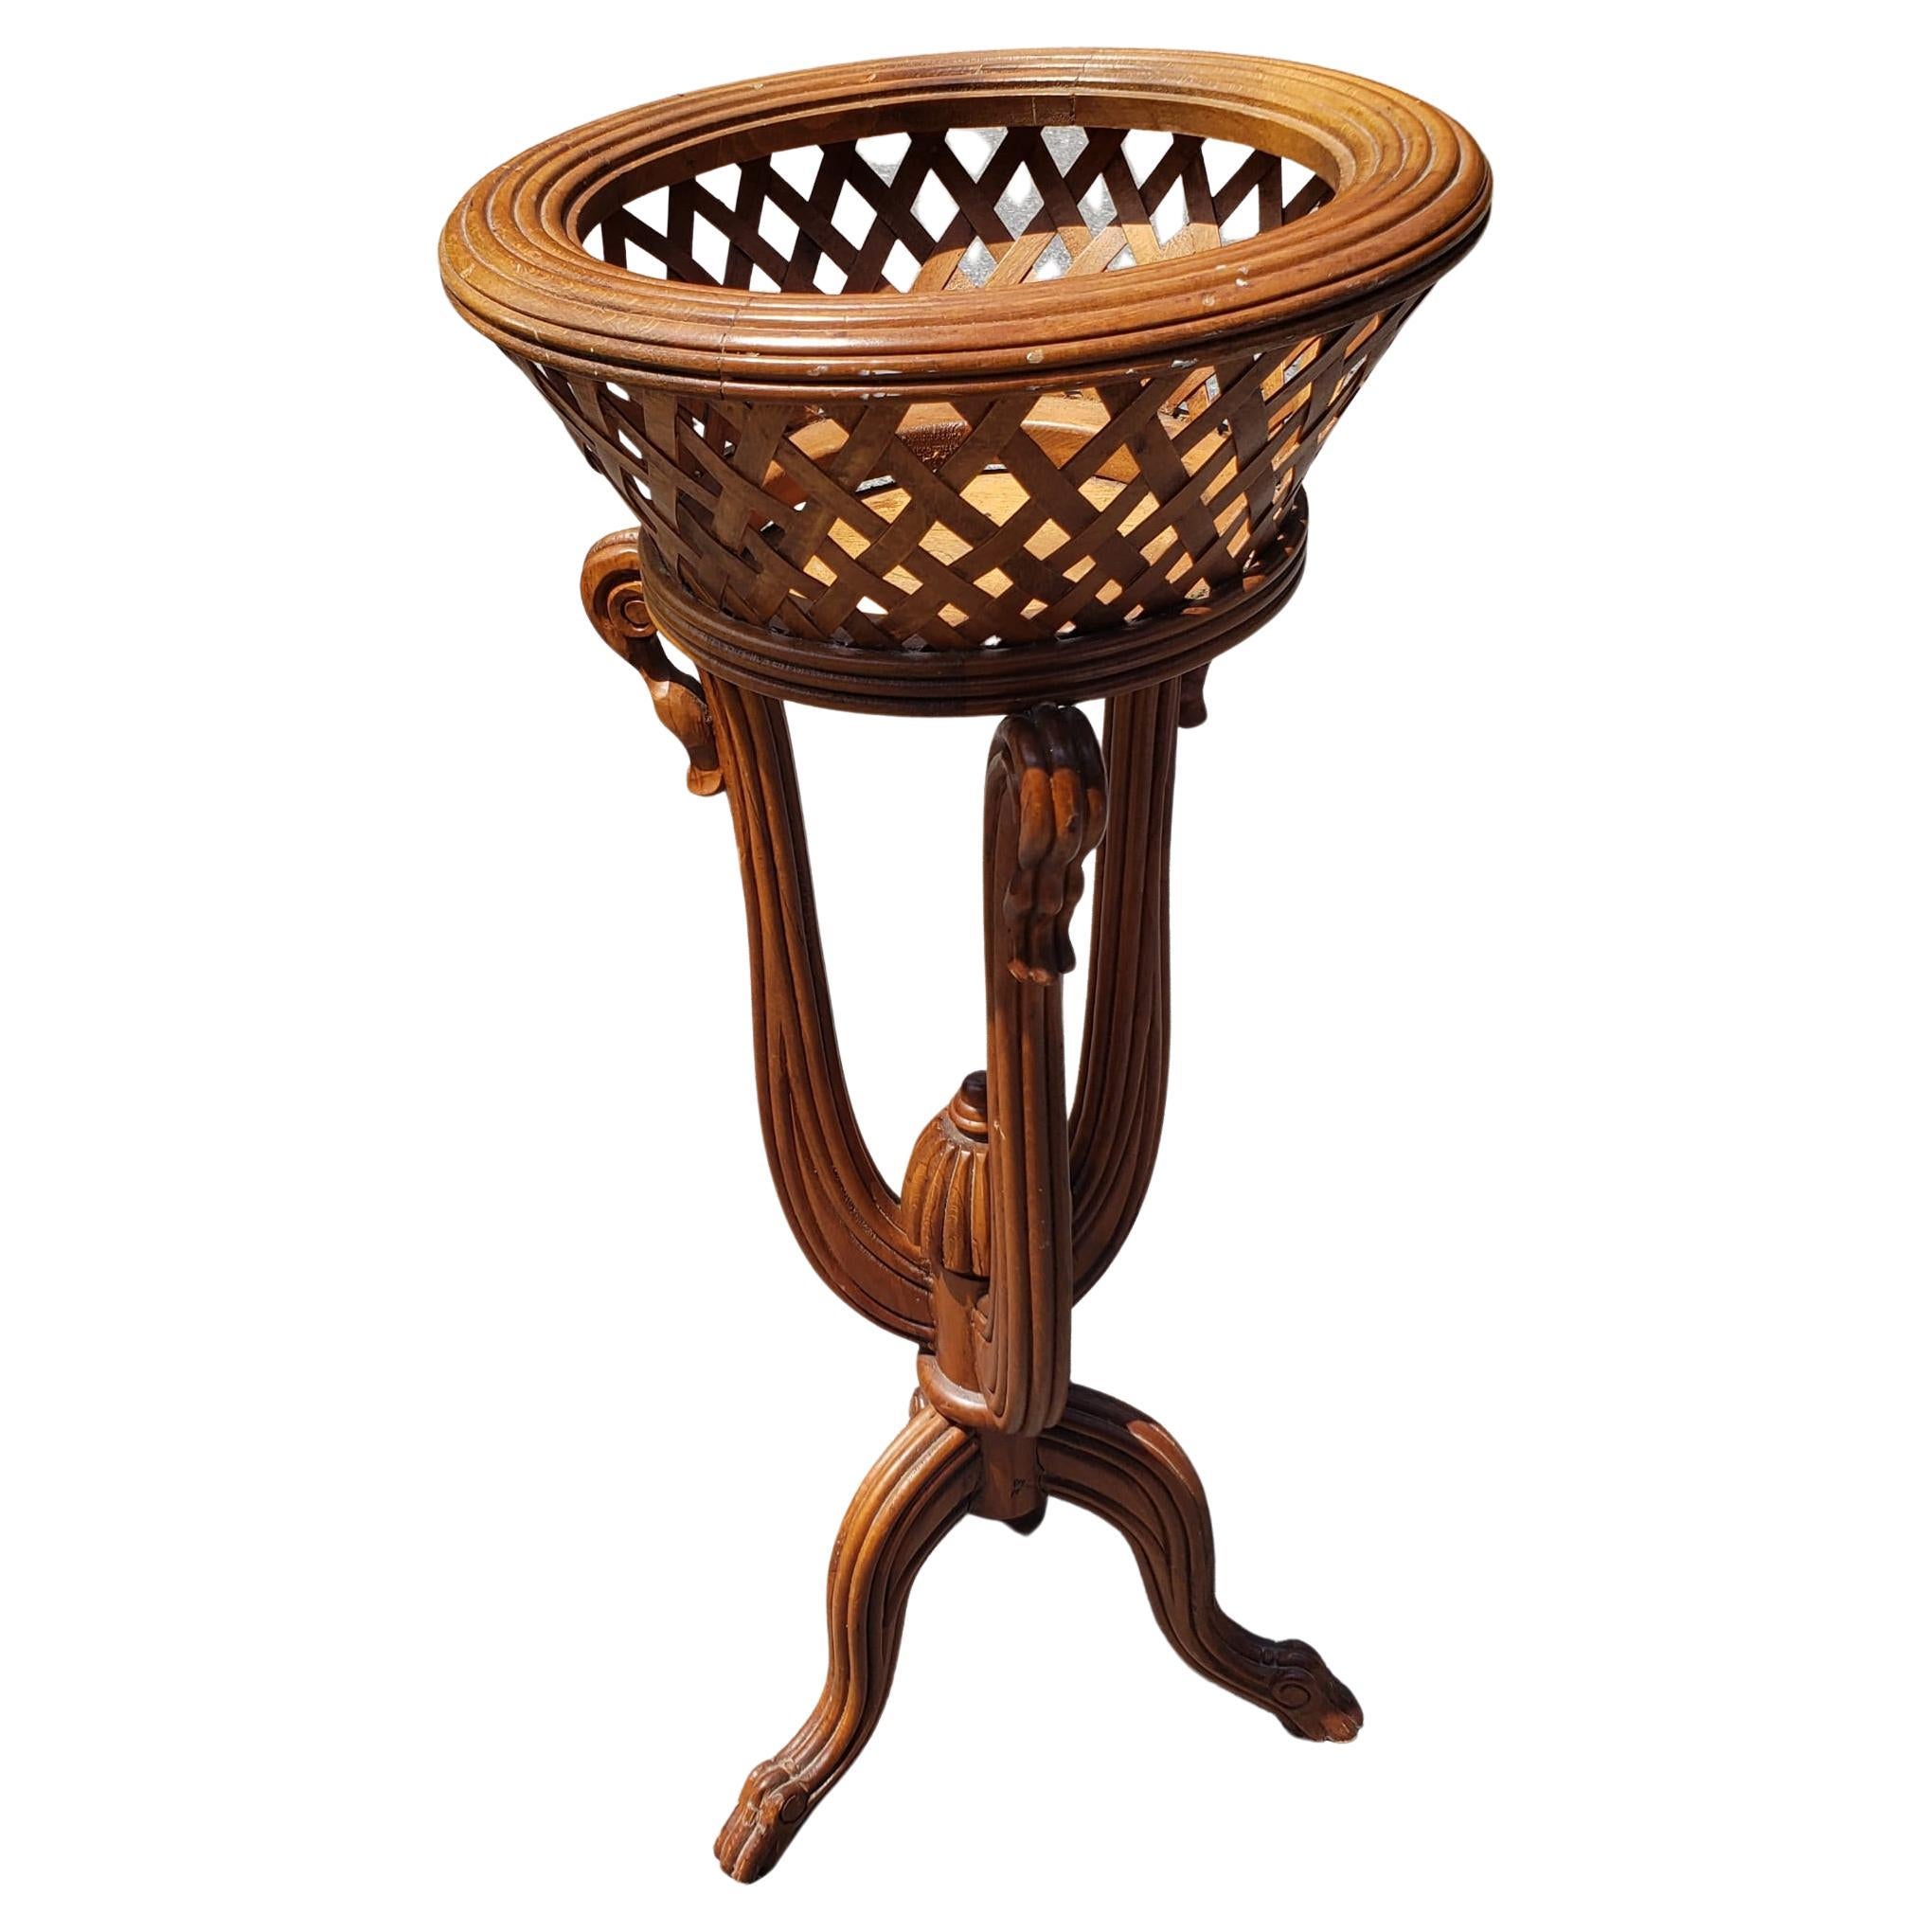 1970s Vintage Fruitwood tripod planter on stand. Carved fruitwood. Hand woven wood planter. Measures 16 inches in diameter and stands 36 inches tall. Opening is 11.25 inches in diameter with 6 inches deep planter basket Good vintage condition.